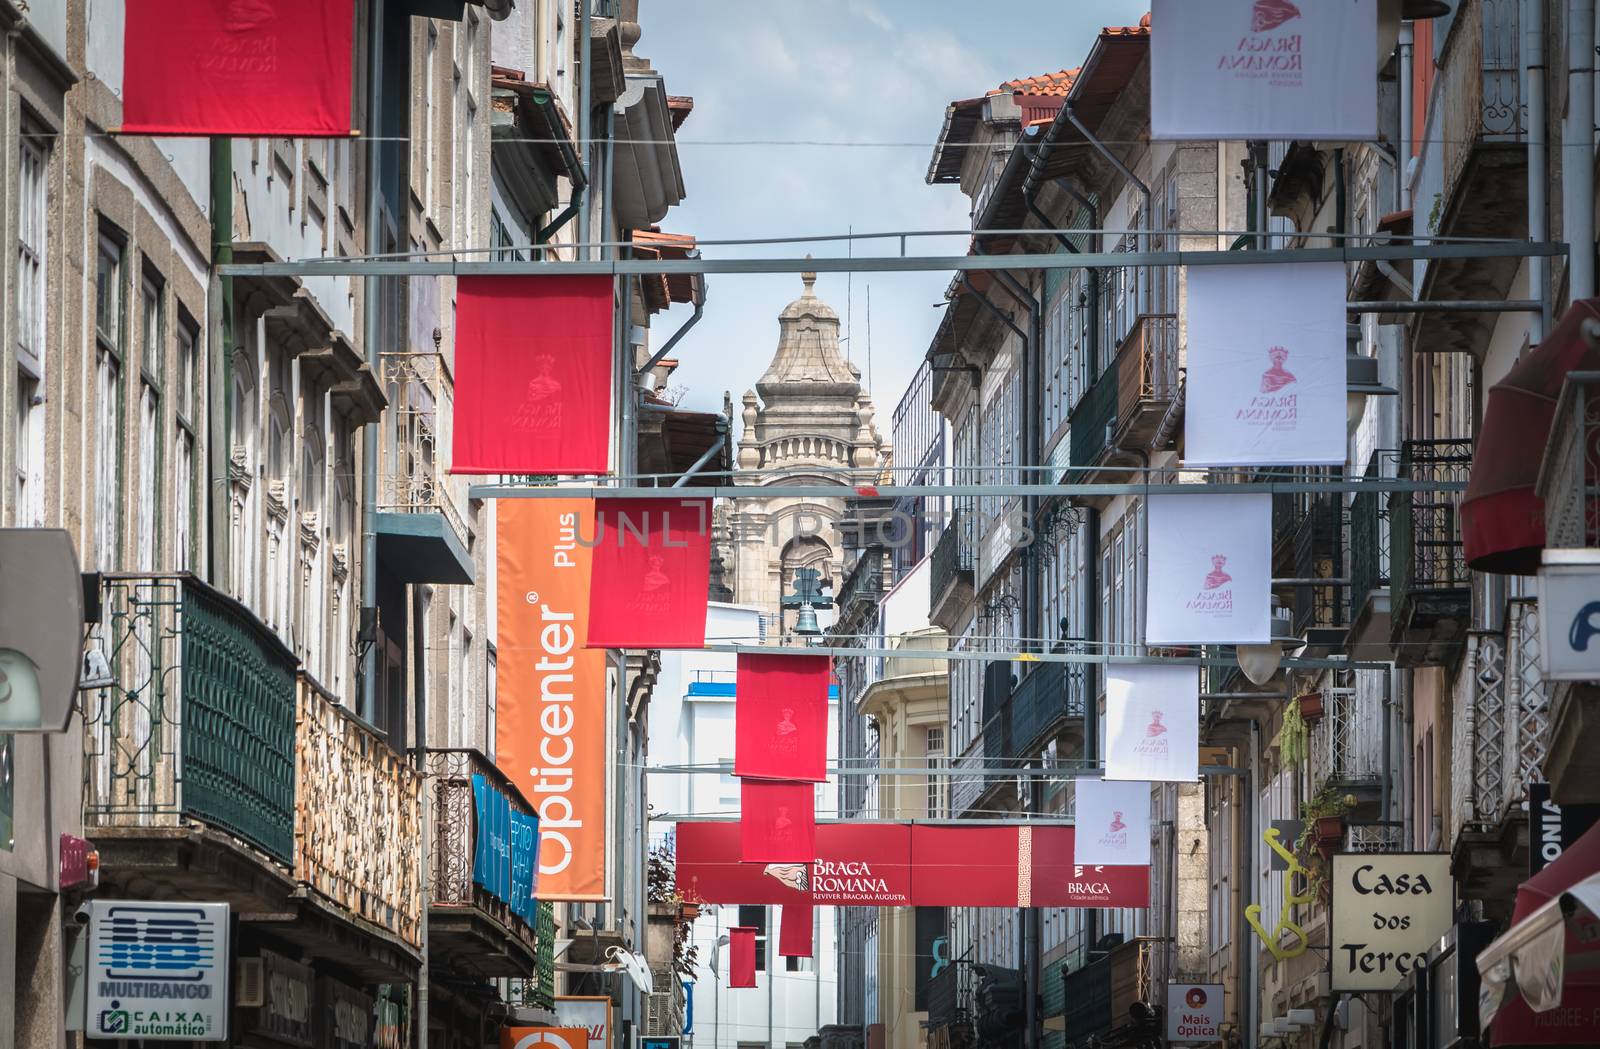 Braga, Portugal - May 23, 2018: View of a street in the historic city center decorated for the city festival Braga Romana on a spring day